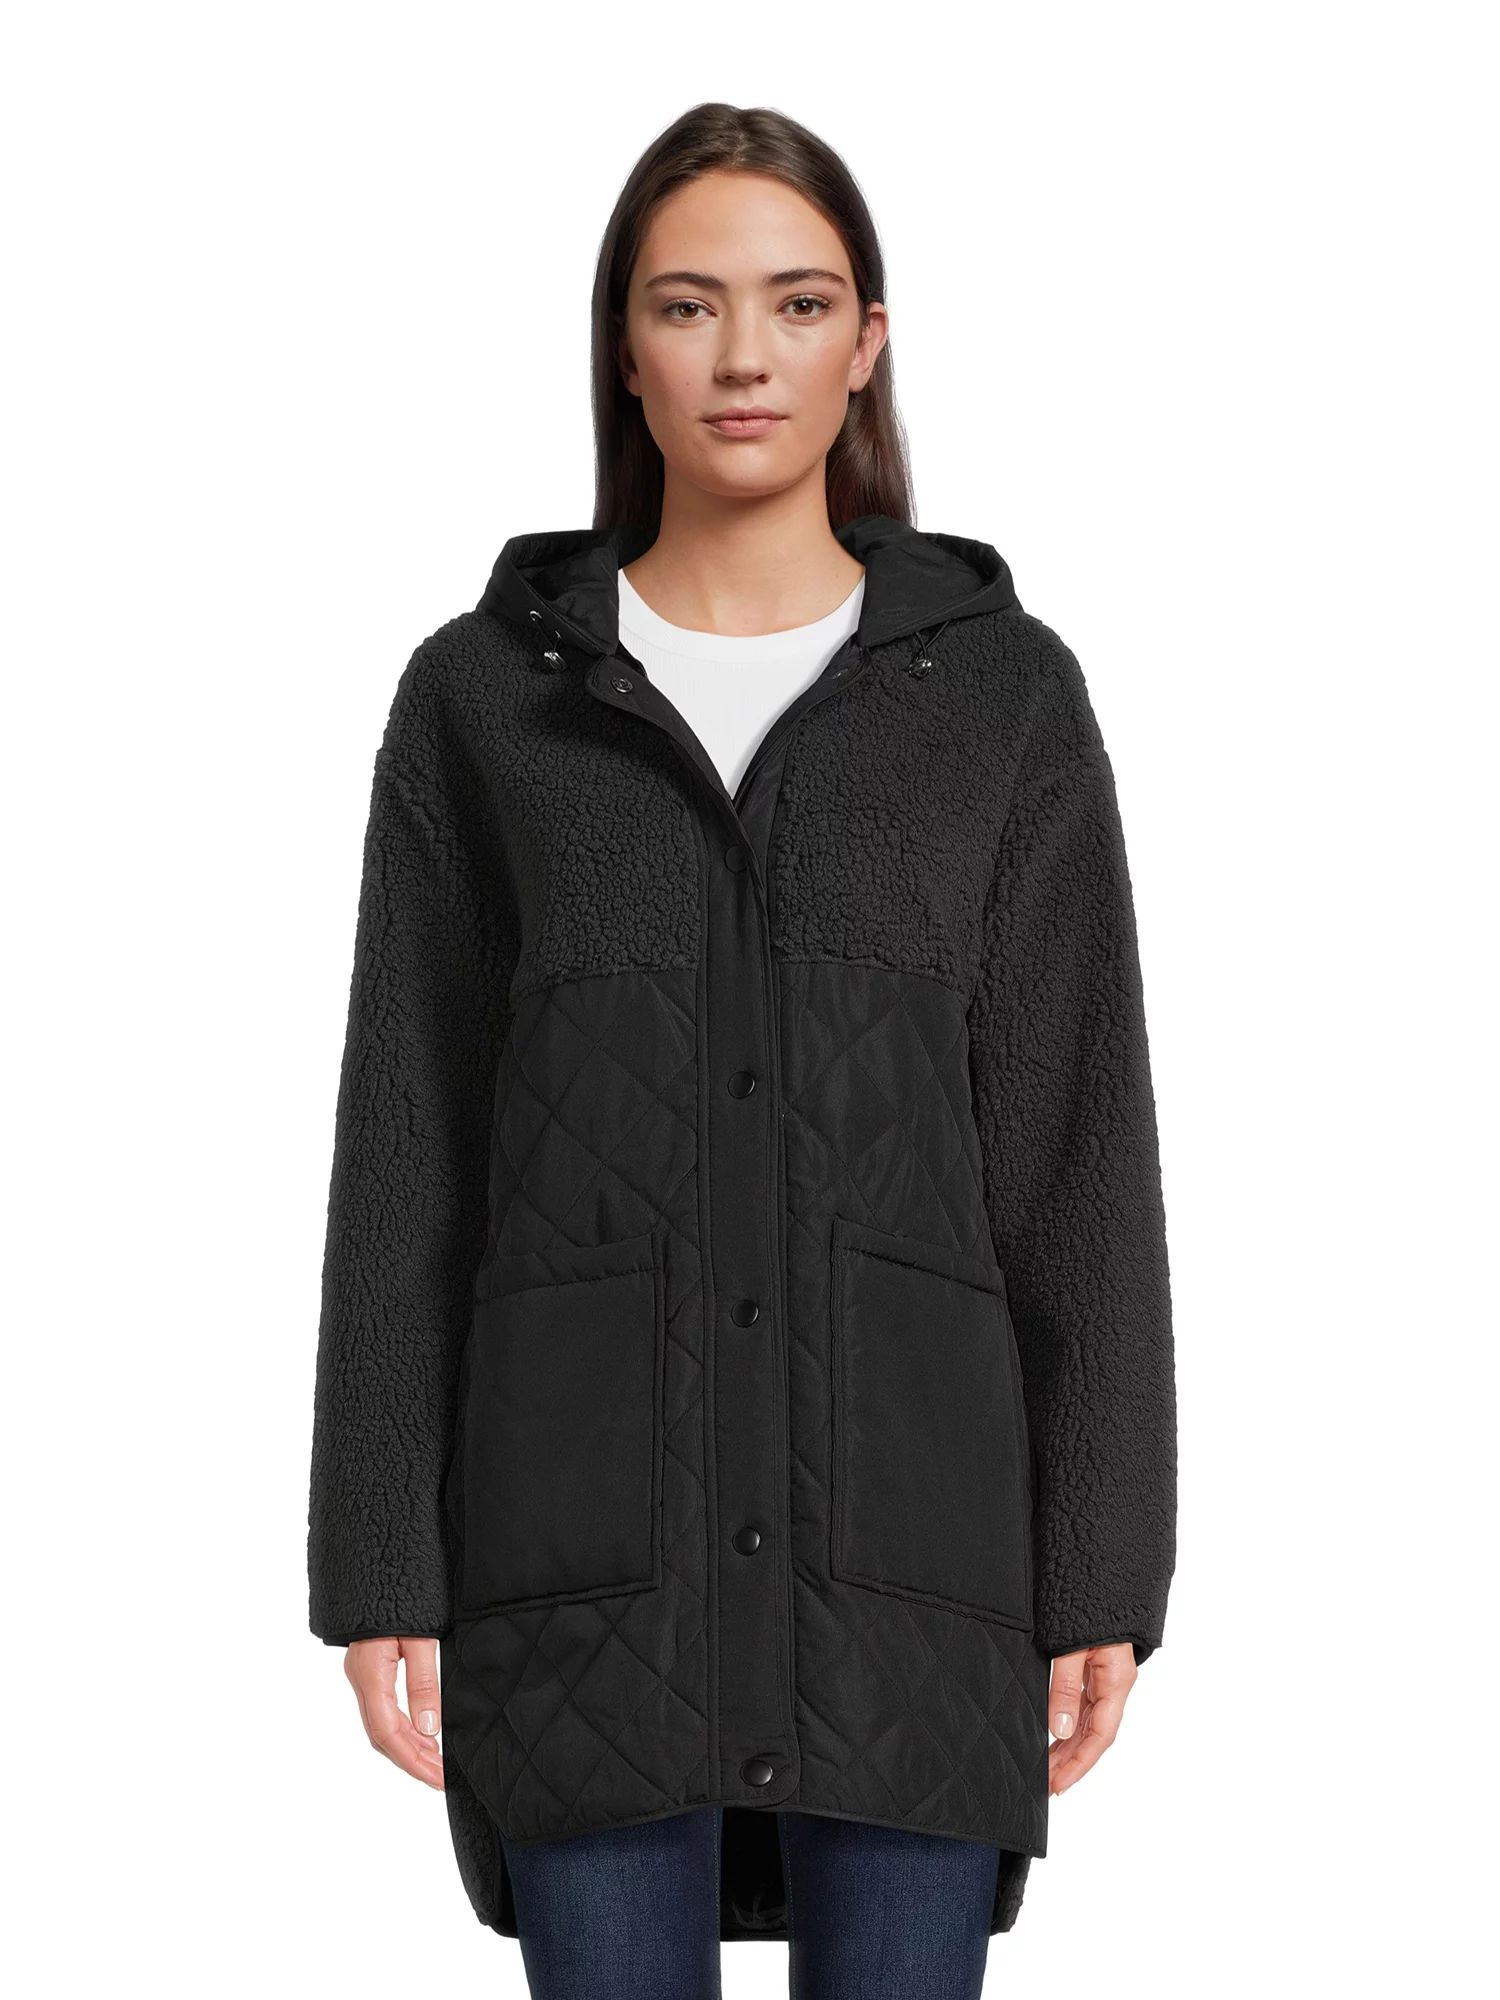 Jason Maxwell Women’s and Women’s Plus Size Mixed Media Jacket with Hood, Sizes S-3X | Walmart (US)